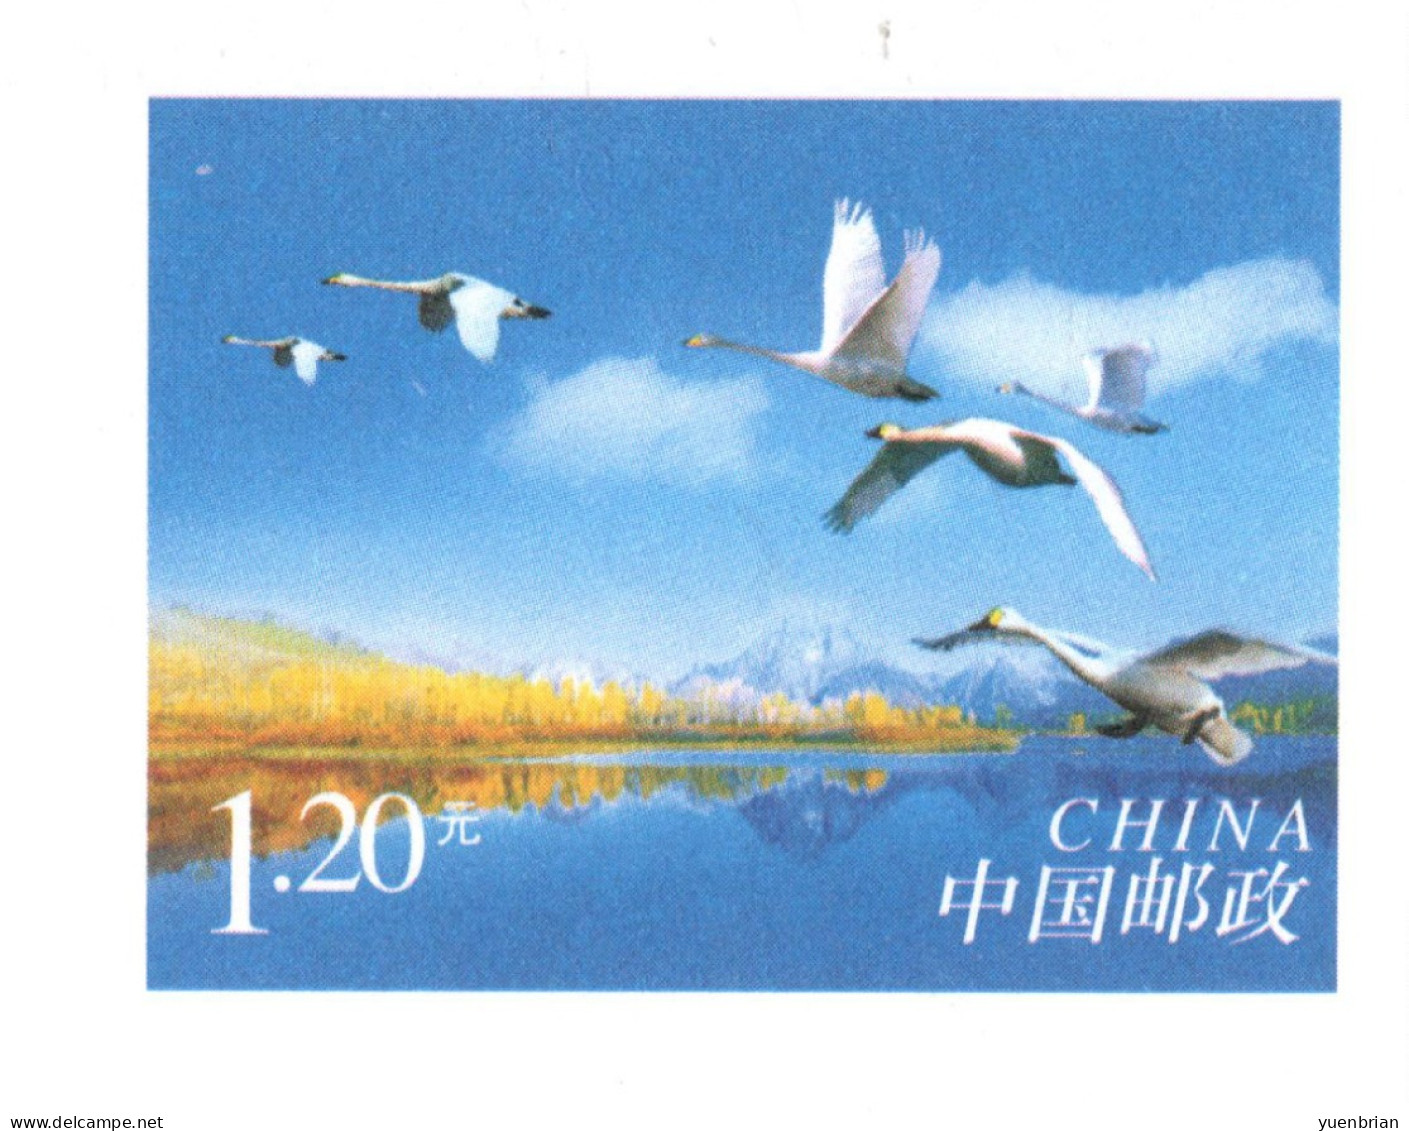 China 2006, Postal Stationary, Pre-Stamped Cover $1.20, MNH** - Swans